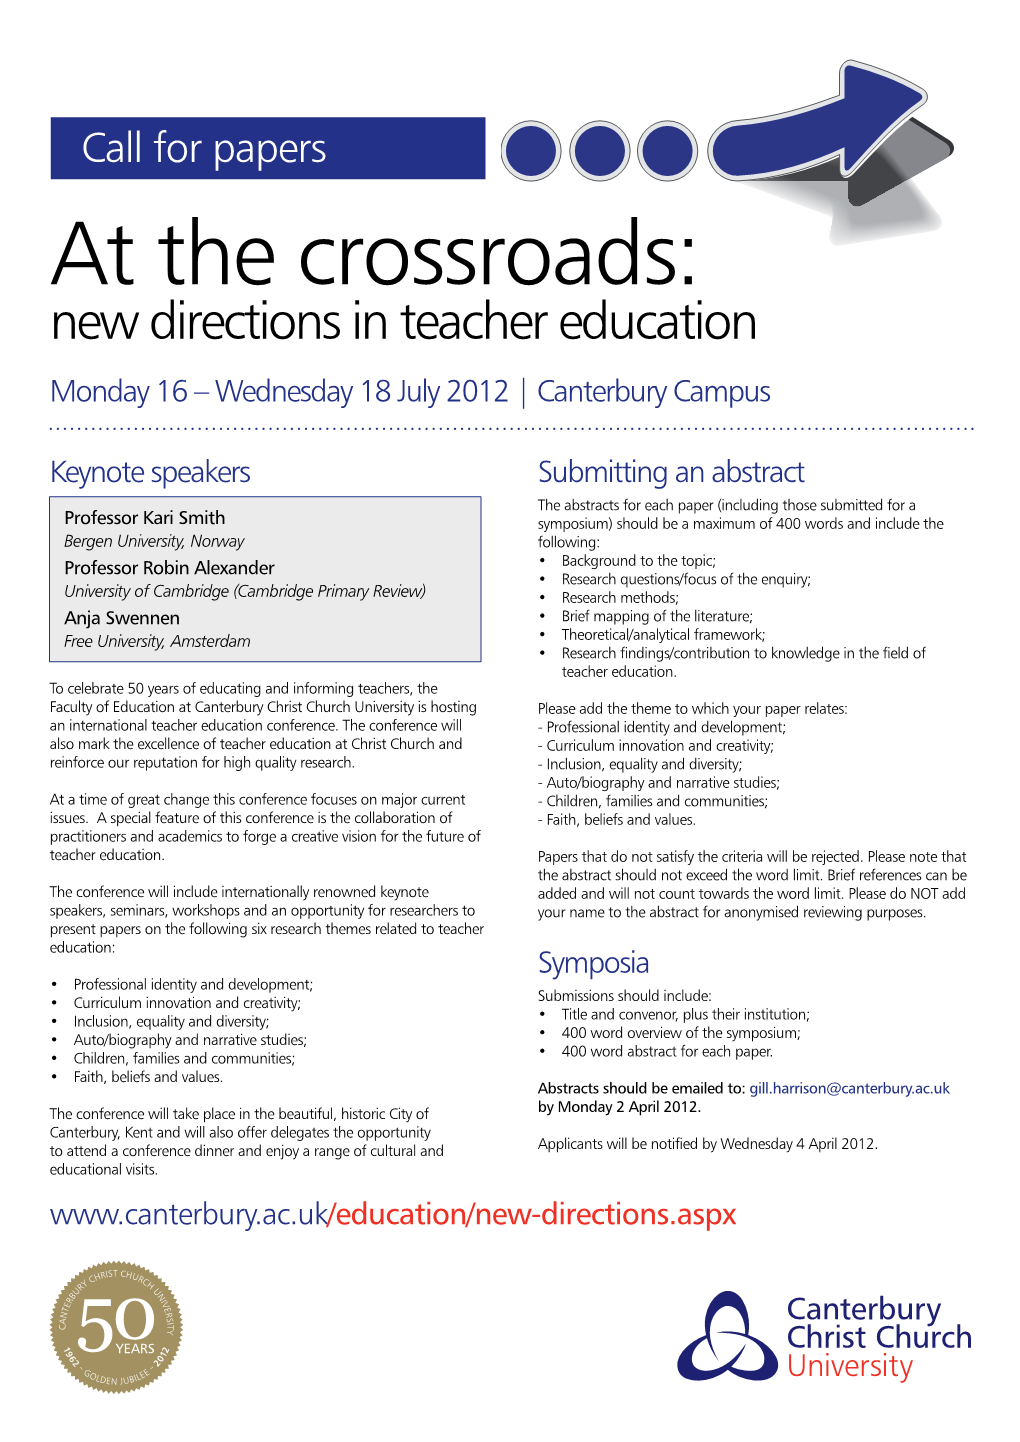 At the Crossroads: New Directions in Teacher Education Monday 16 – Wednesday 18 July 2012 | Canterbury Campus